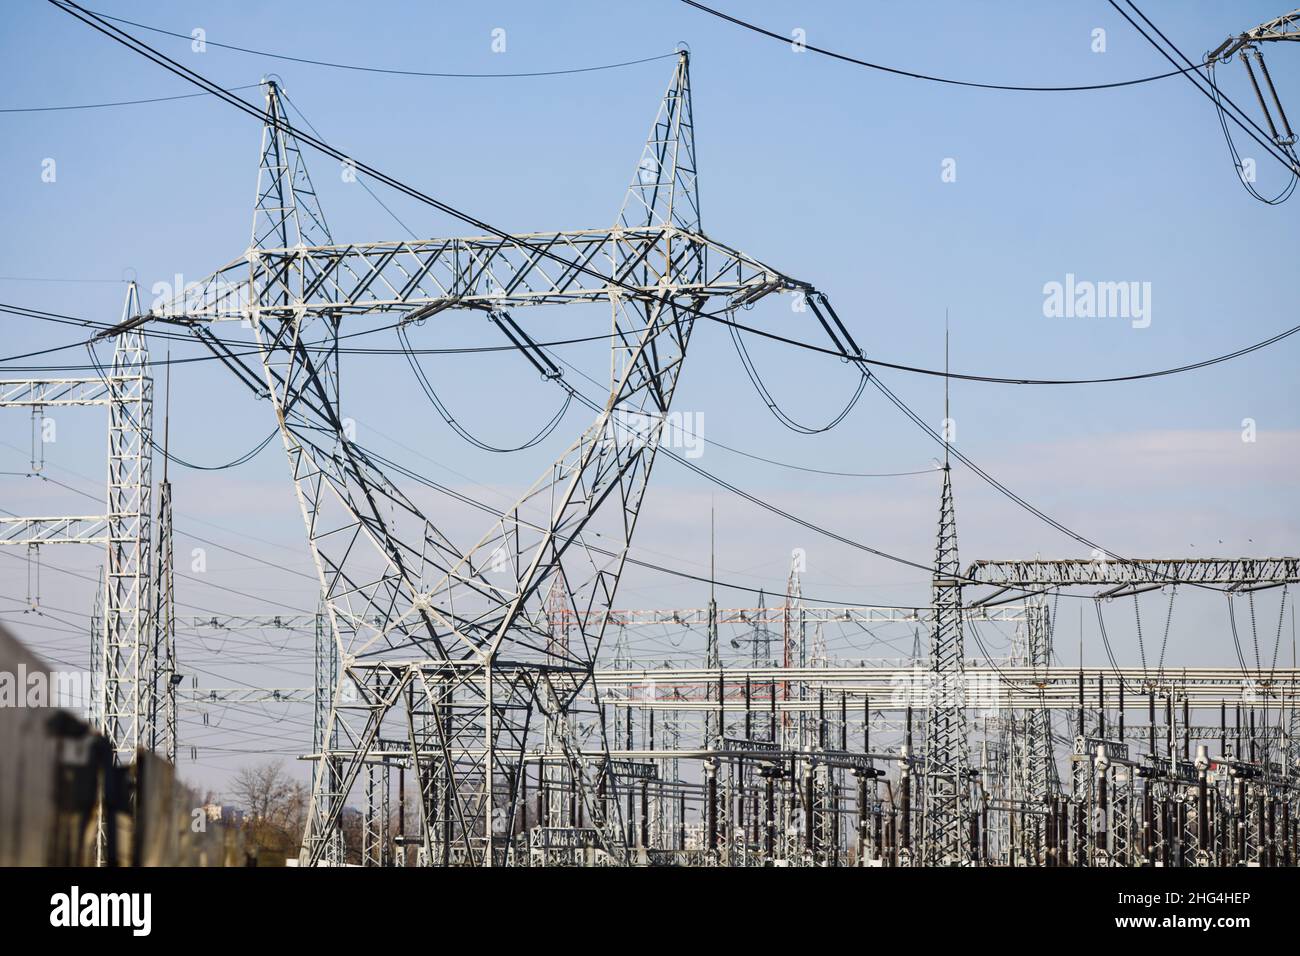 High voltage transmission lines on metallic poles in Bucharest, Romania. Stock Photo